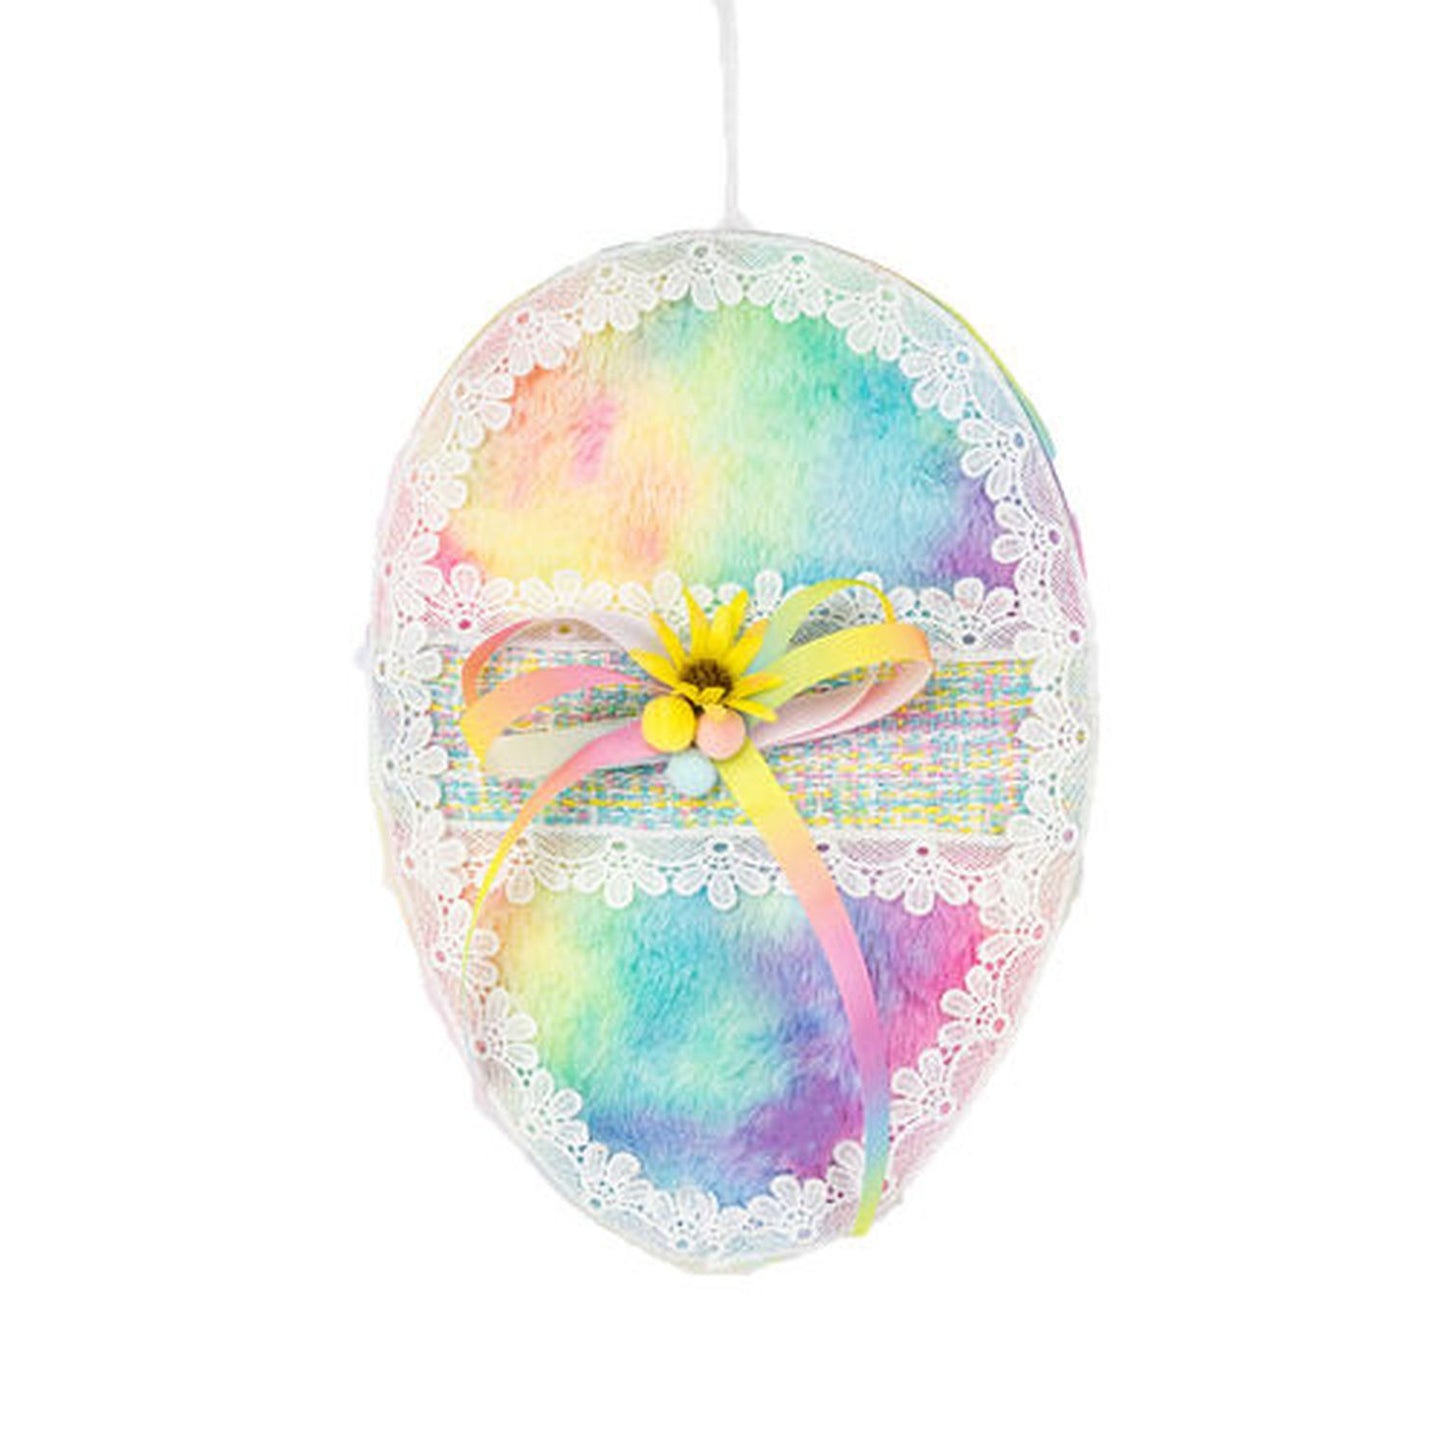 December Diamonds Cotton Candy Land Rainbow Hanging Shaped Egg With Trim And Bow